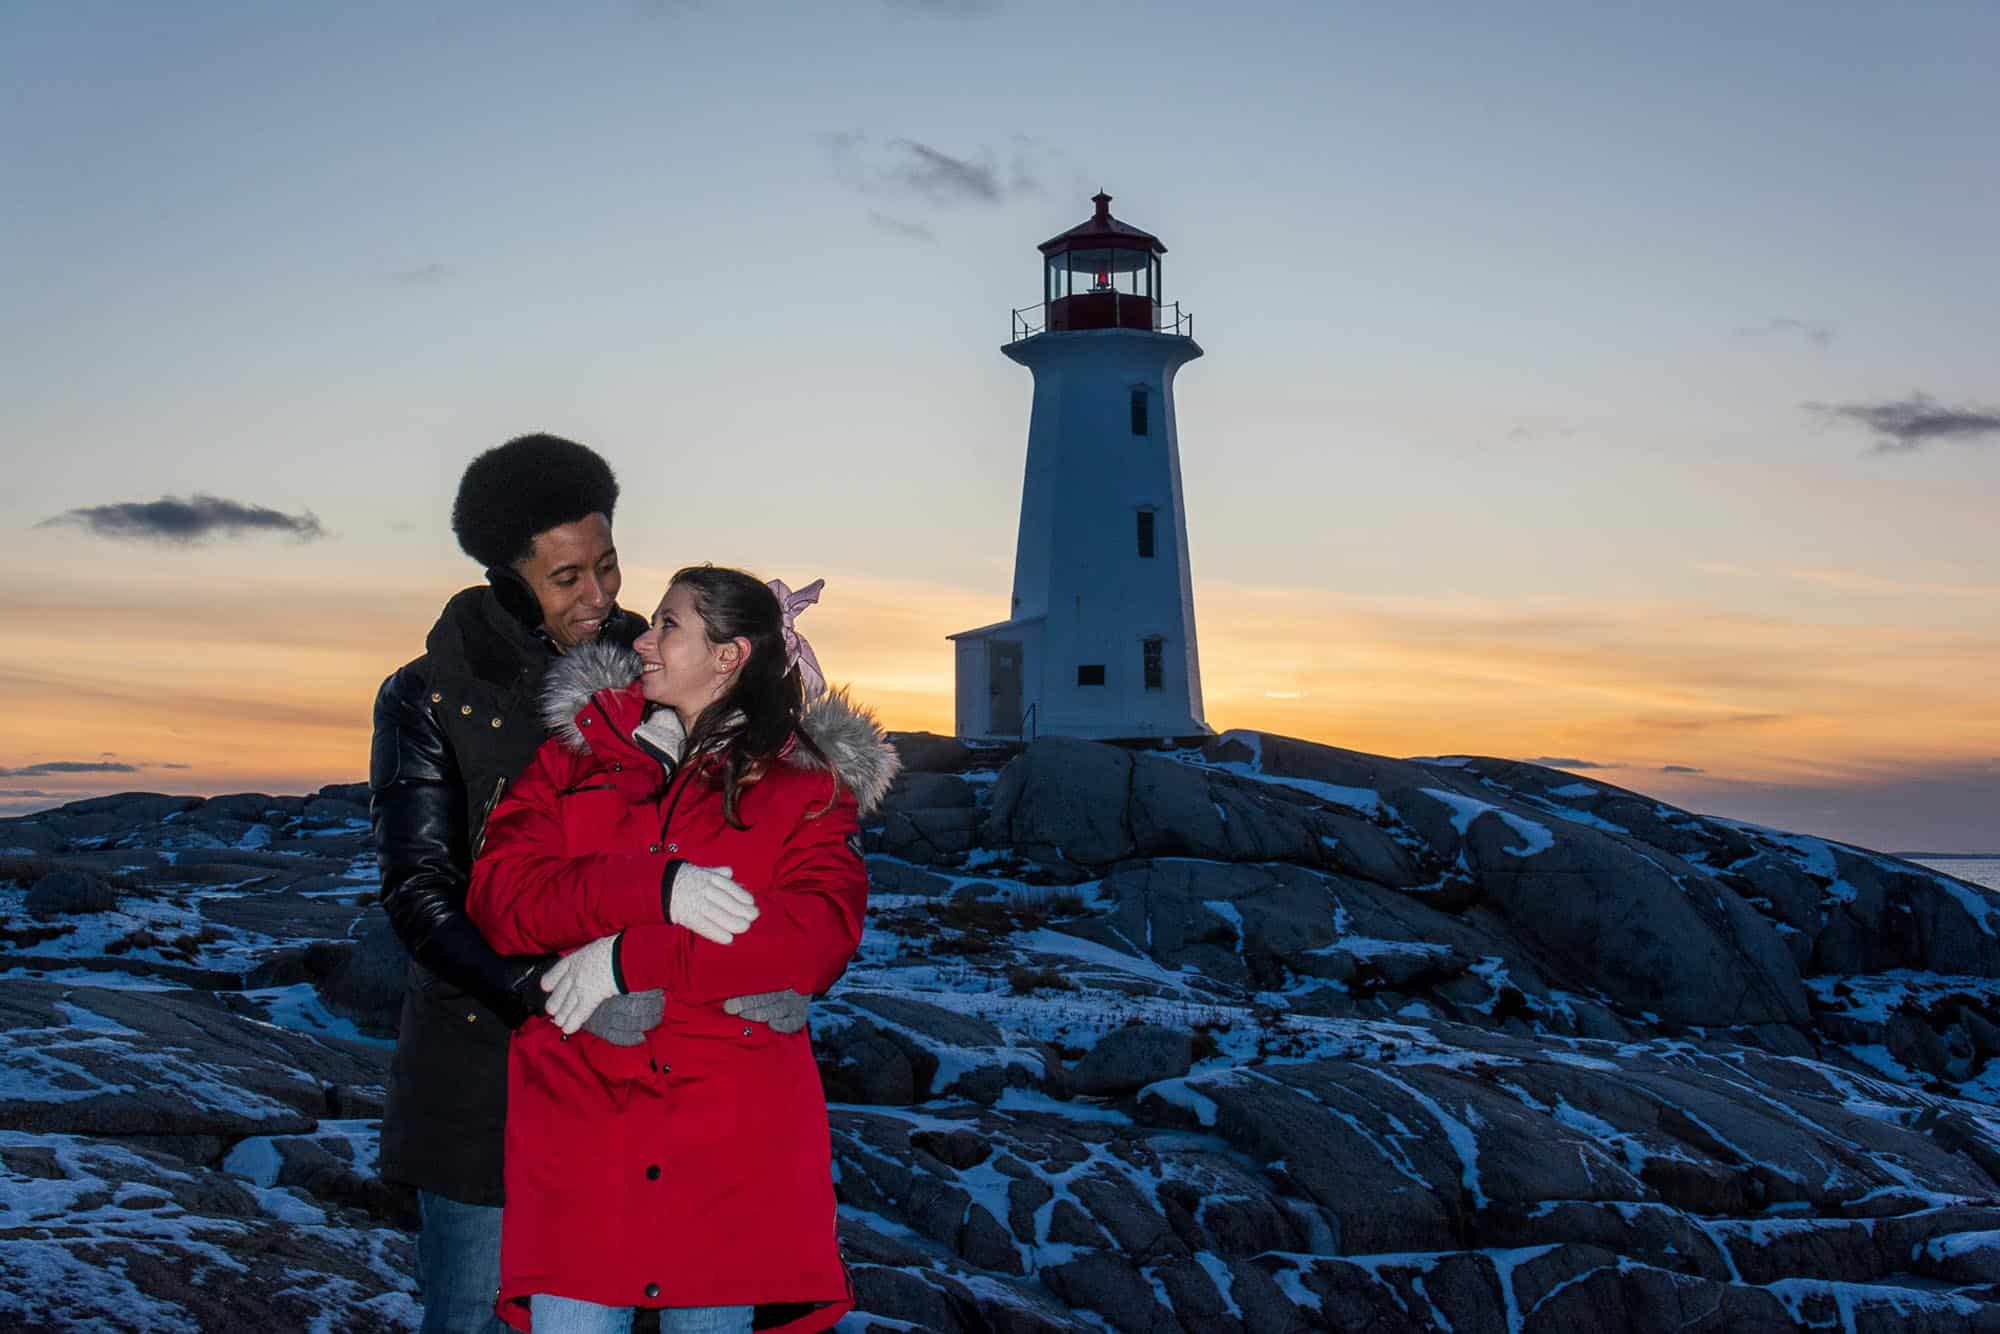 During the winter a couple pose in front of the lighthouse at Peggy's Cove, Nova Scotia - image by Picture Perfect Tours and Geordie Mott